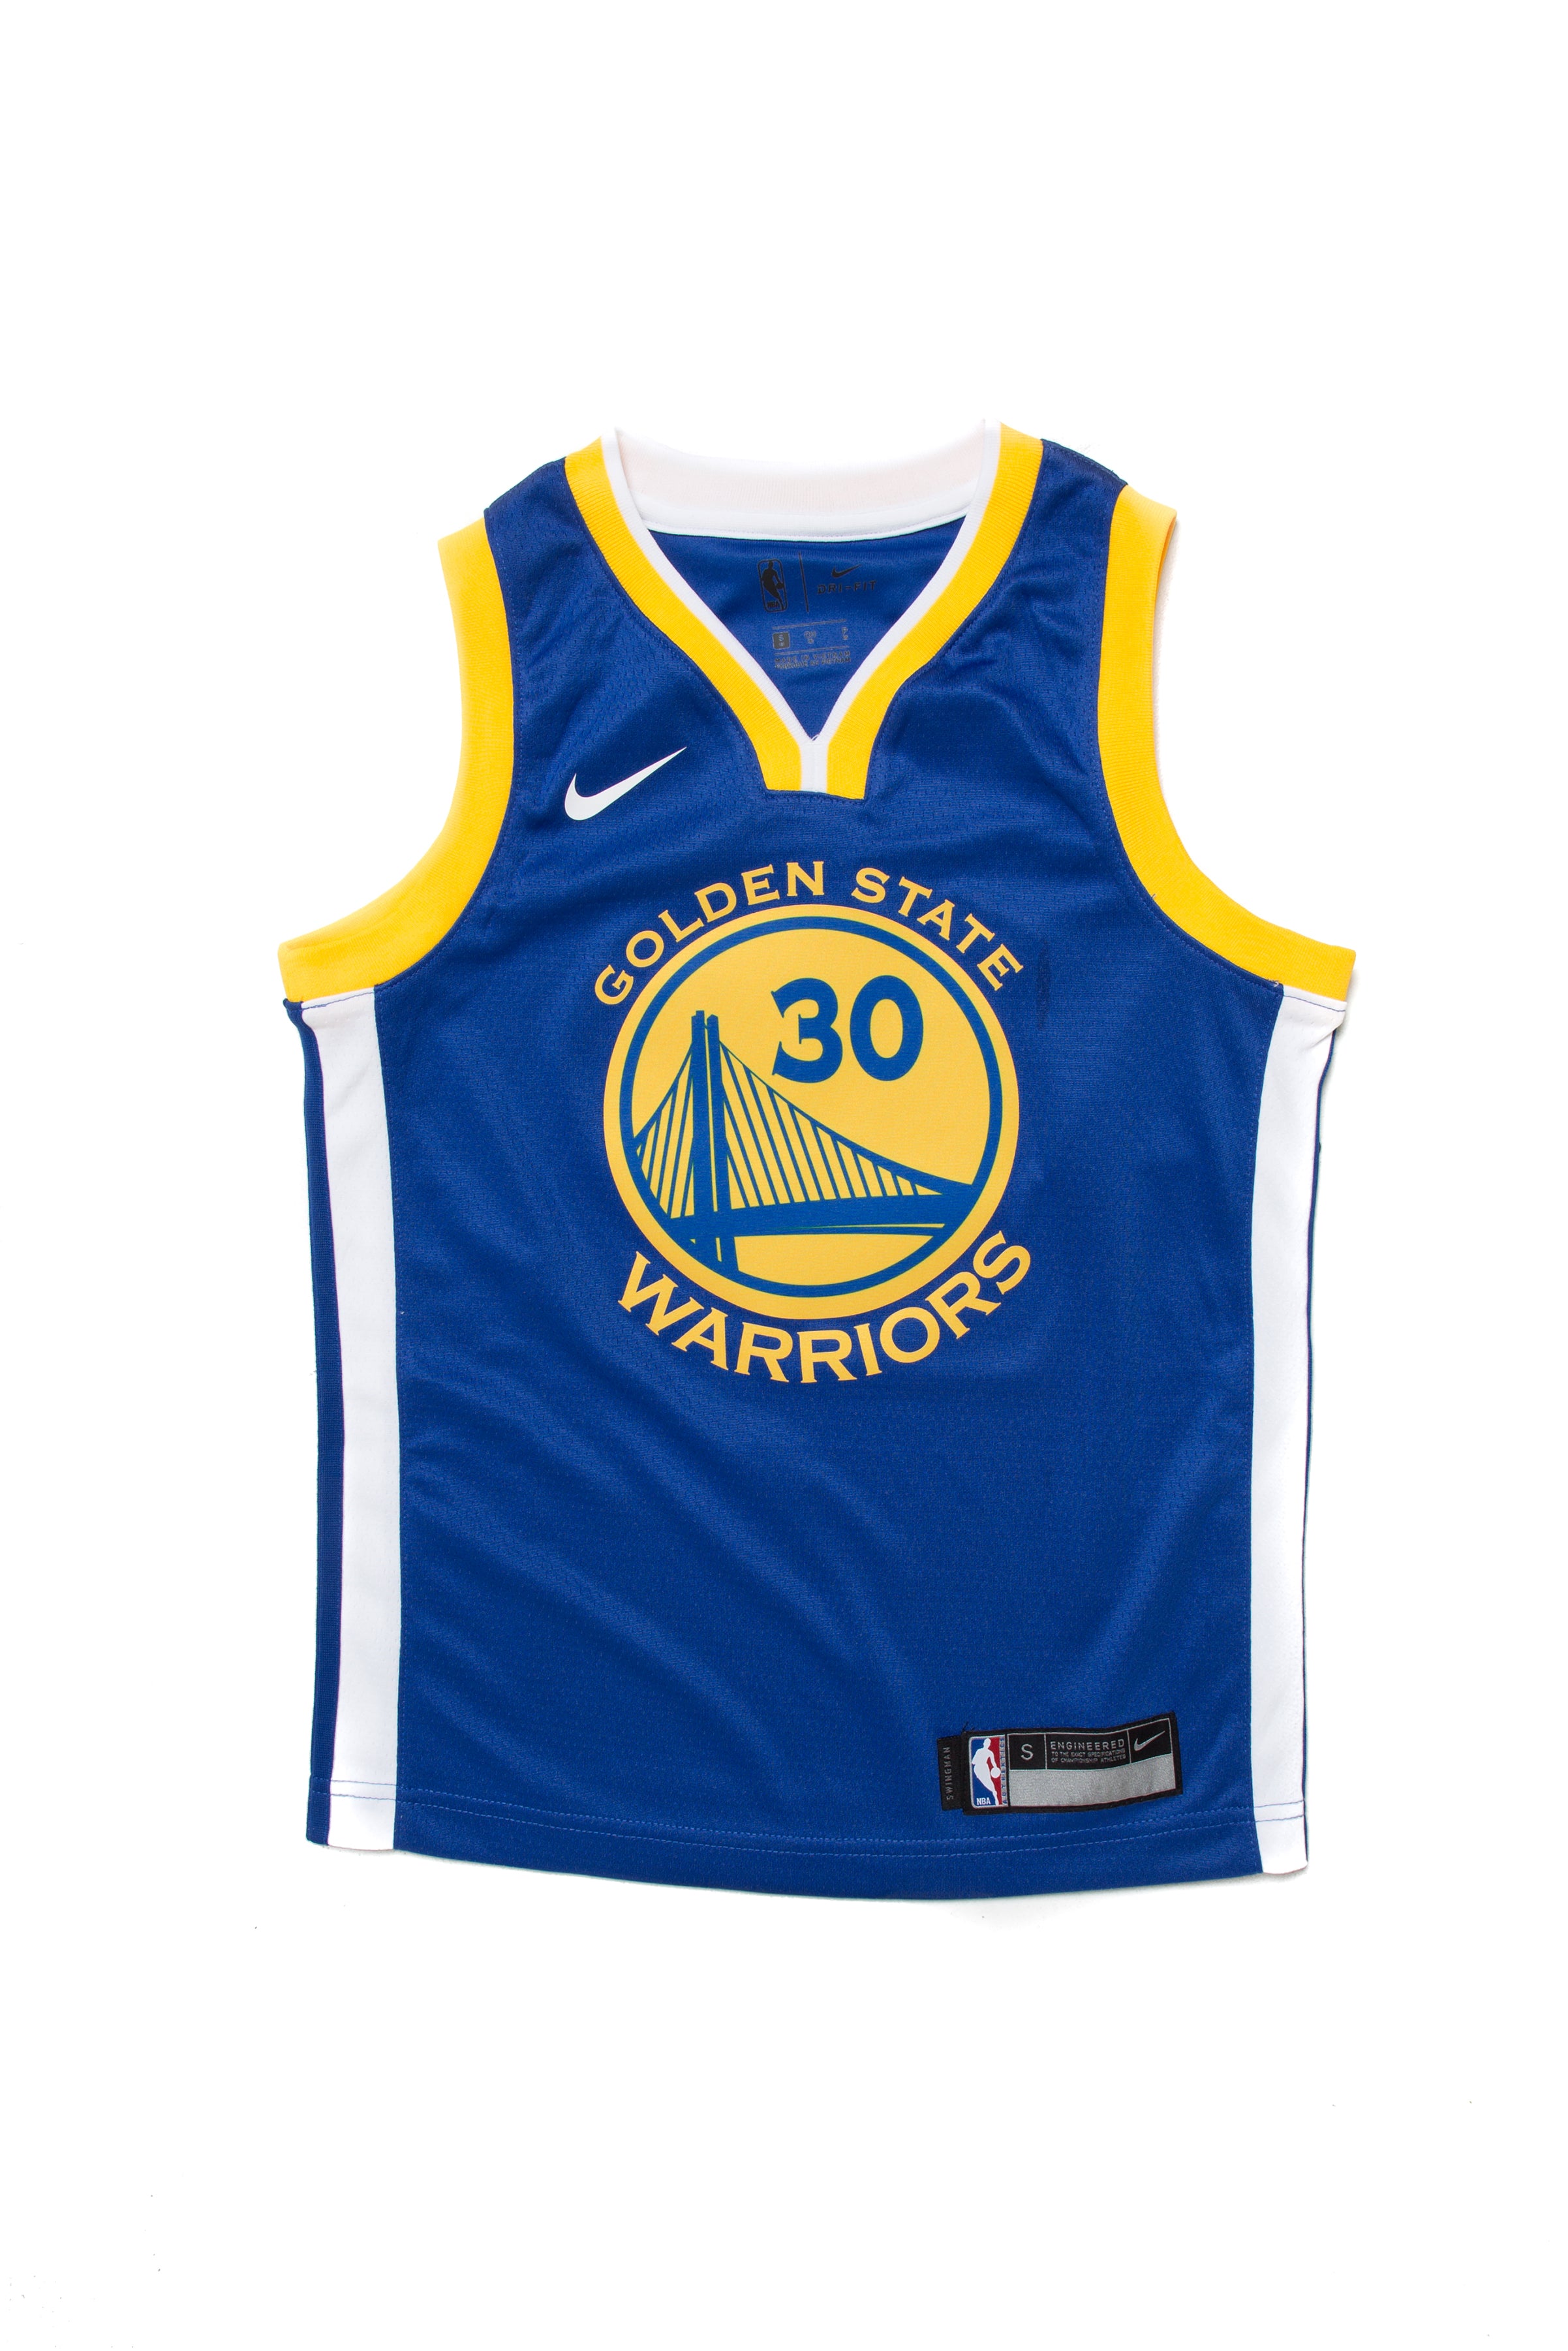 stephen curry jersey youth